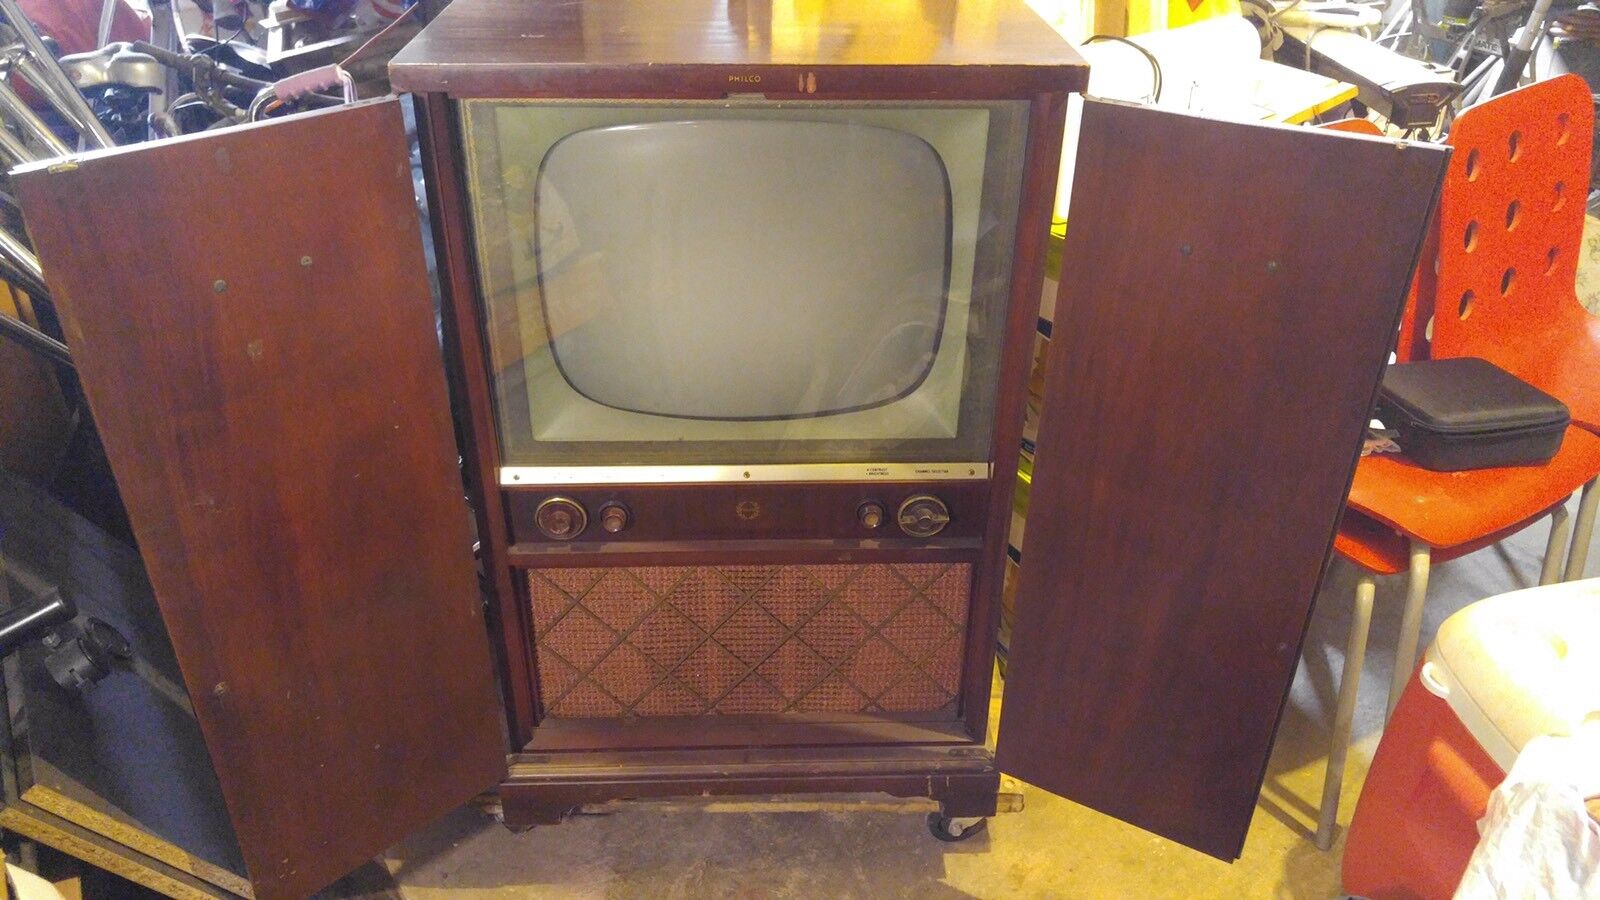 Vintage Philco TV Set Art Deco Cabinet Style Television For Parts Or Repair